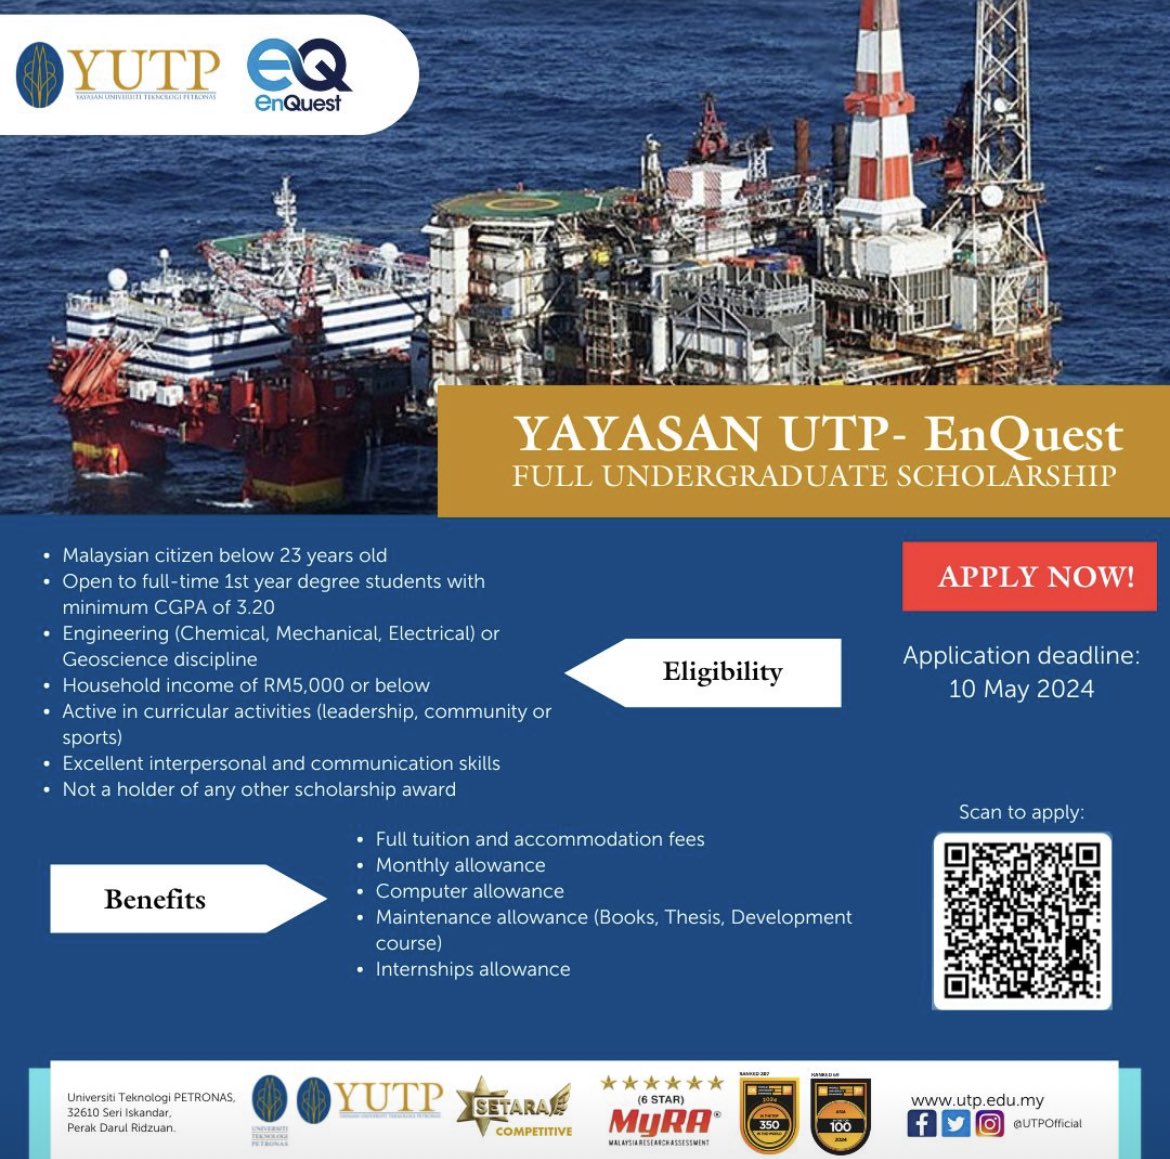 📣Calling all Year 1 students from the Engineering/Geoscience disciplines📣

Apply for the Yayasan UTP X EnQuest Full Undergraduate Scholarship! Full tuition coverage, accommodation, books, and more. Shape the future of the oil and gas industry!

Deadline: 10 May 2024